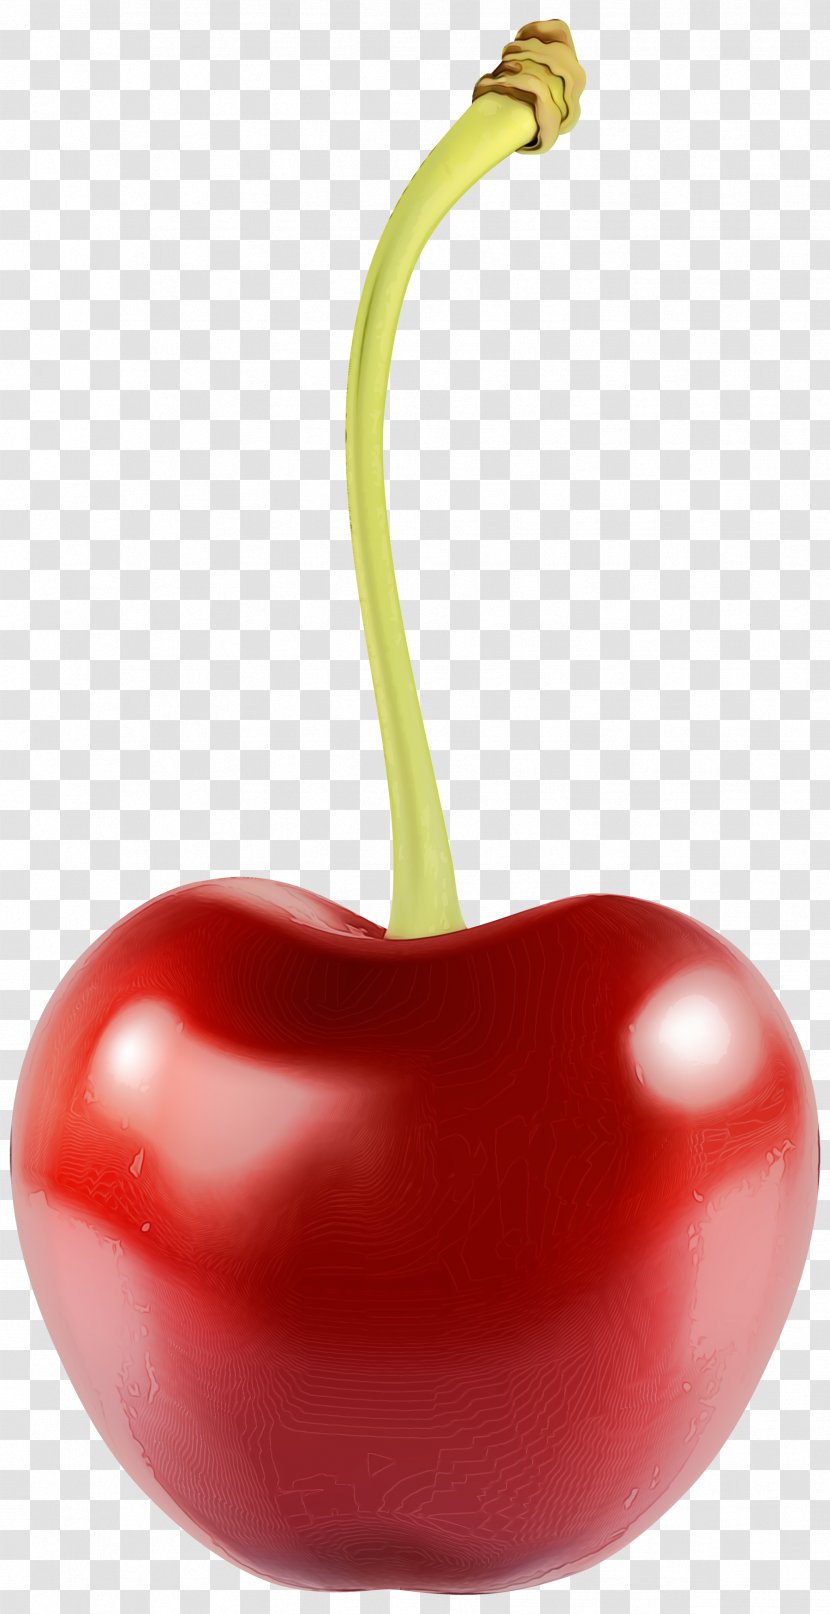 Cherry Natural Foods Red Fruit Plant - Bell Peppers And Chili - Vegetable Transparent PNG